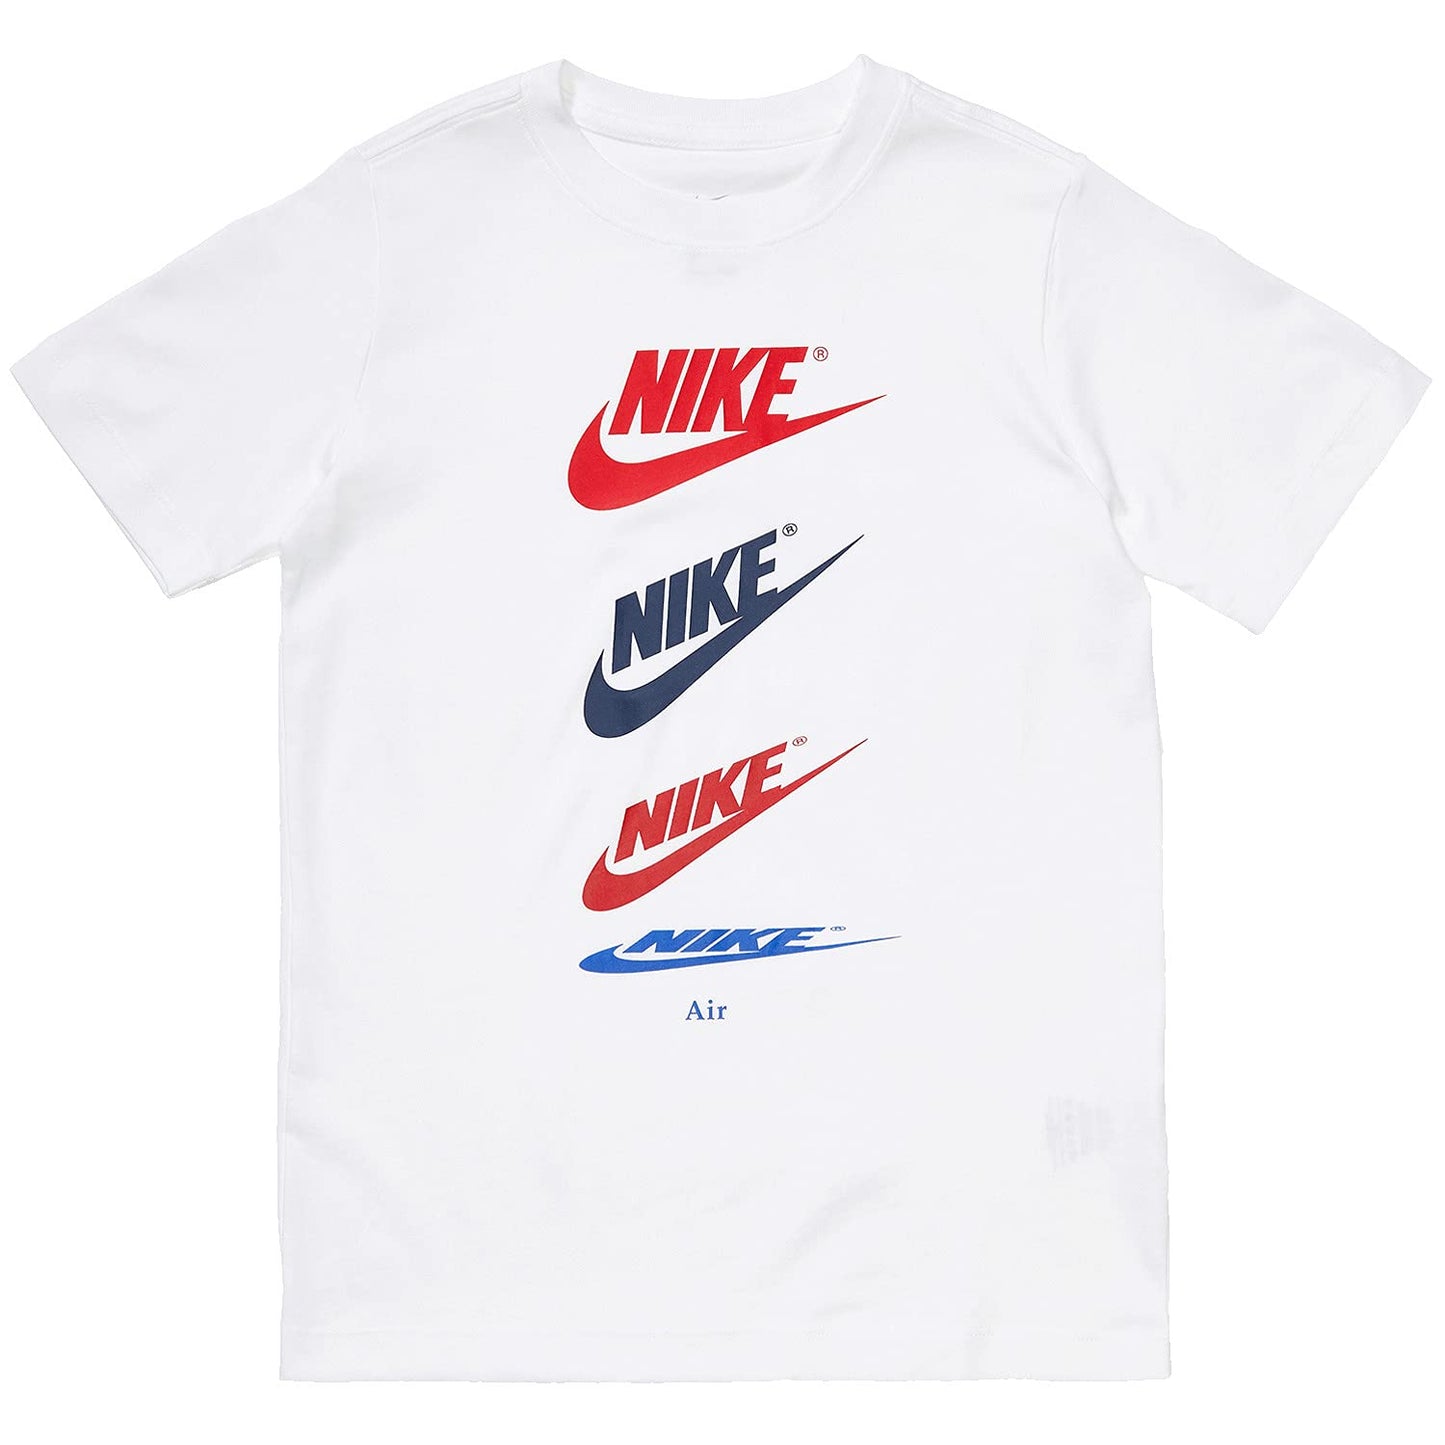 Image 1 of Sportswear Futura Repeat Tee - Extended Size (Big Kids)